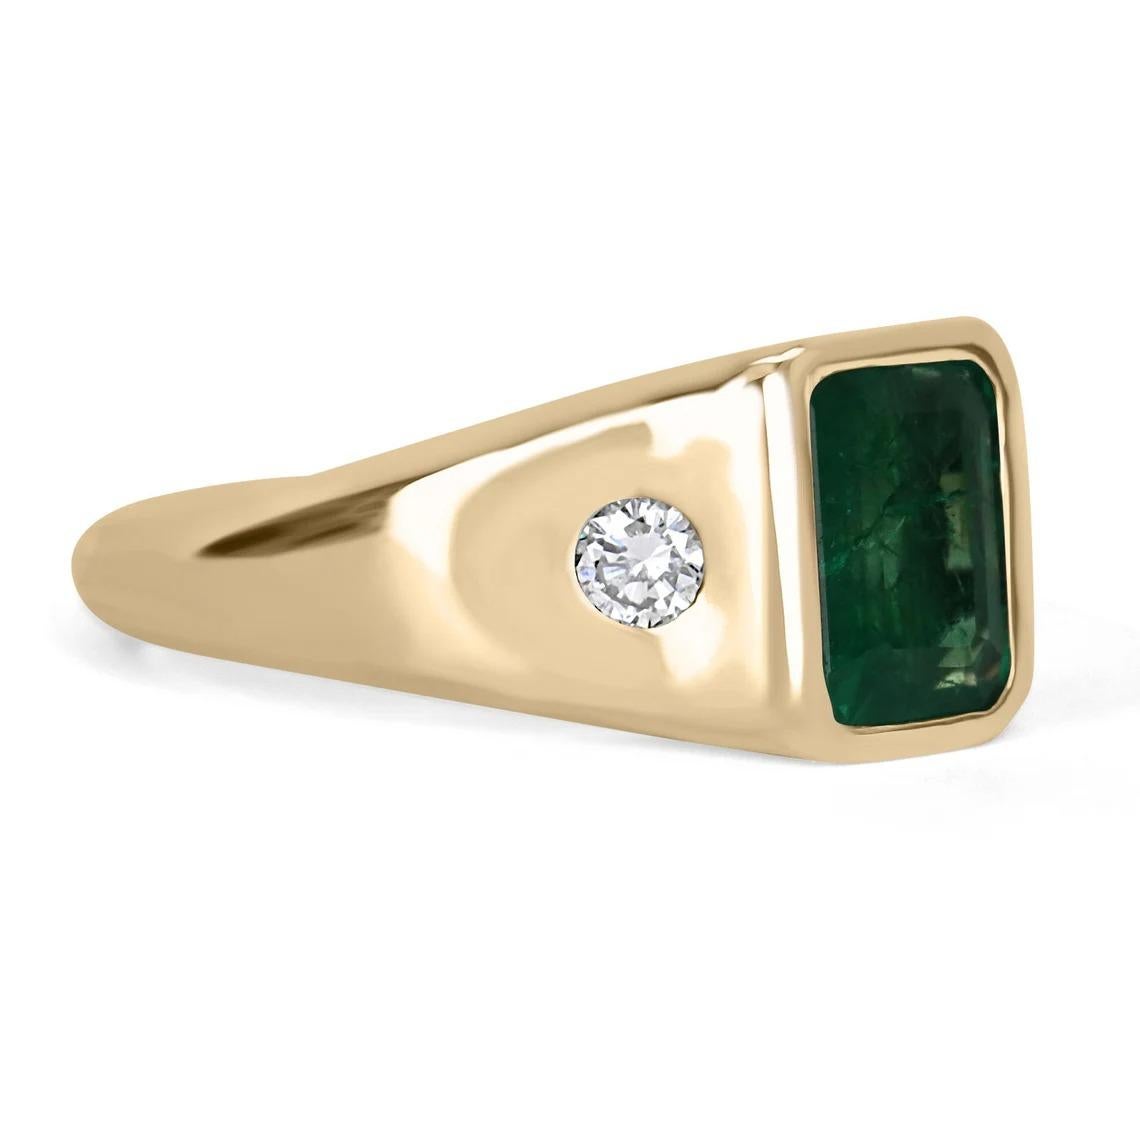 Displayed is a classic modern dark green emerald & round diamond three-stone men's unisex ring in 14K yellow gold. This unique solitaire ring carries an emerald in a secure hand bezel setting giving it extra protection and shine. Fully faceted, this